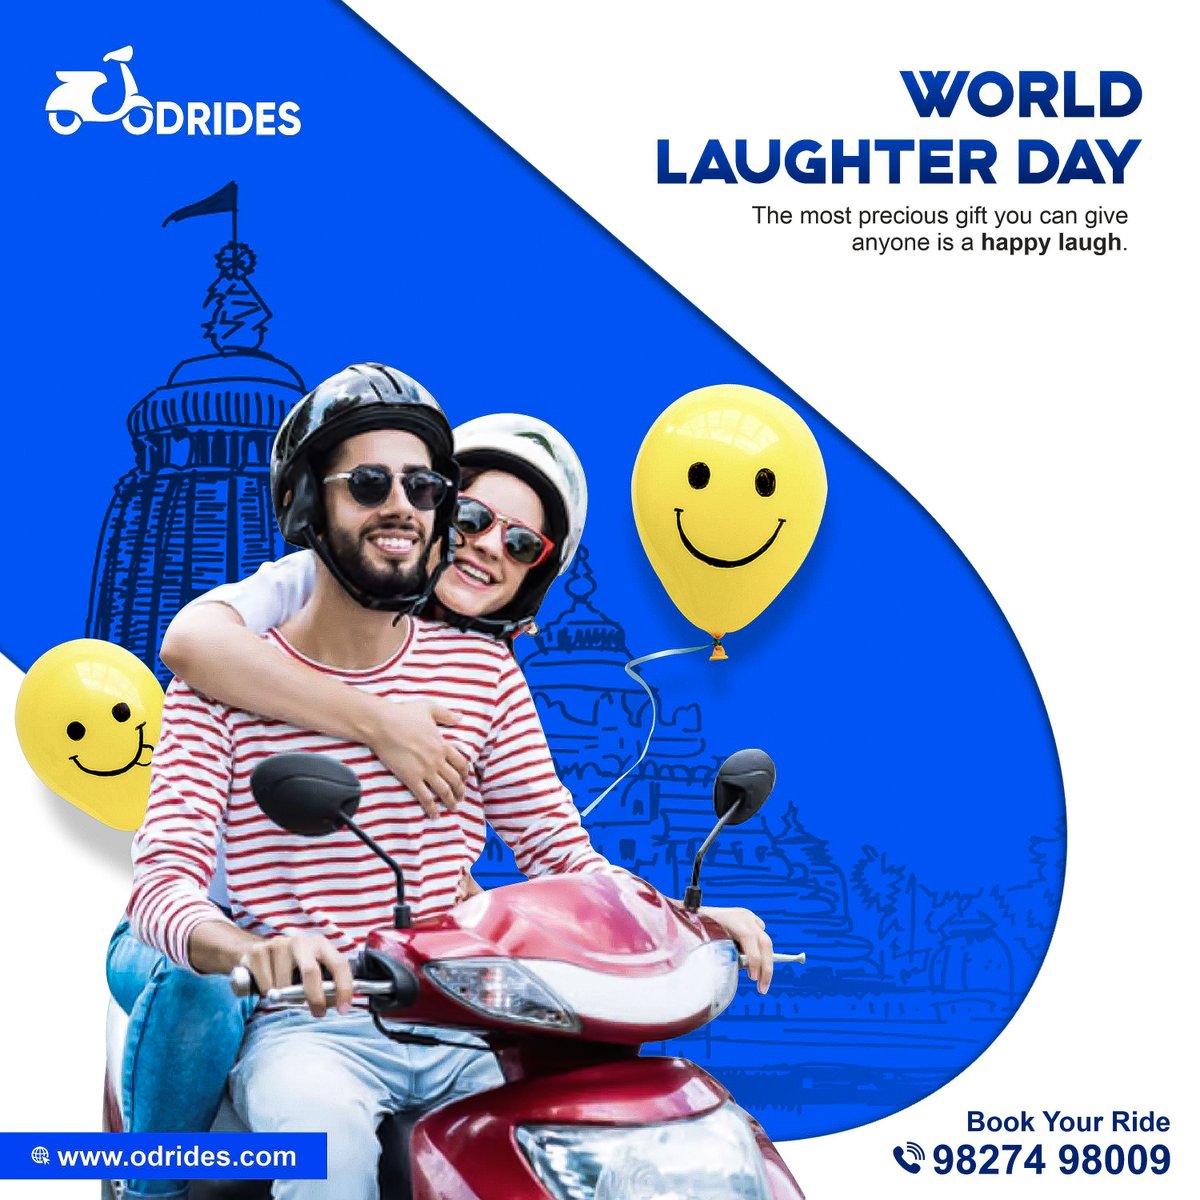 The best kind of therapy is laughter. Sending you laughter-filled wishes on World Laughter Day!😄

#ODRIDES #LaughterDay #WorldLaughterDay #LaughterDay2024 #SpreadLaugh #SpreadHappiness